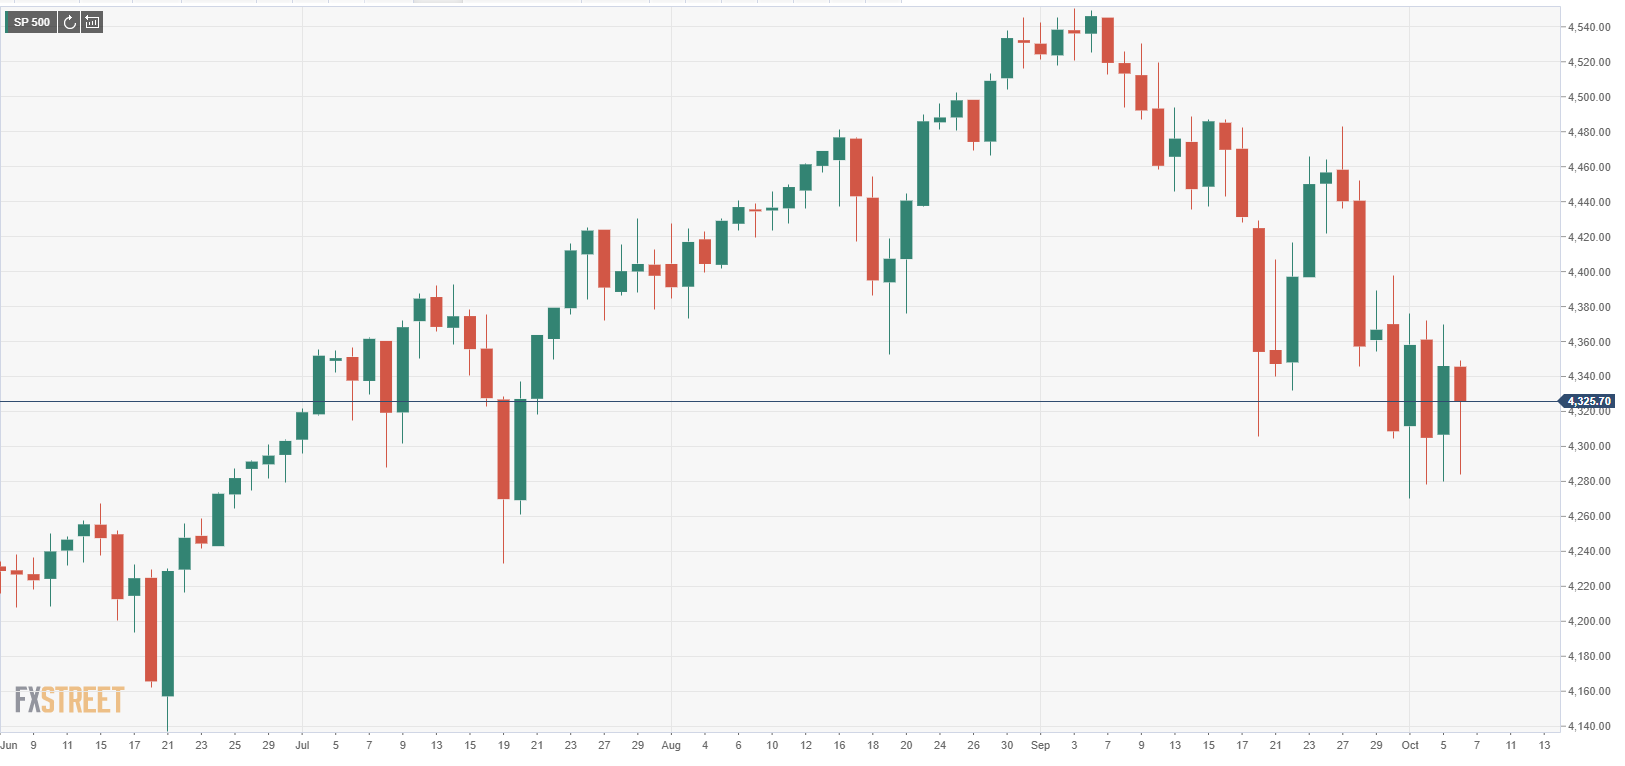 S&P 500 Index Opens Deep Into Negative Territory, Approaching 4,300